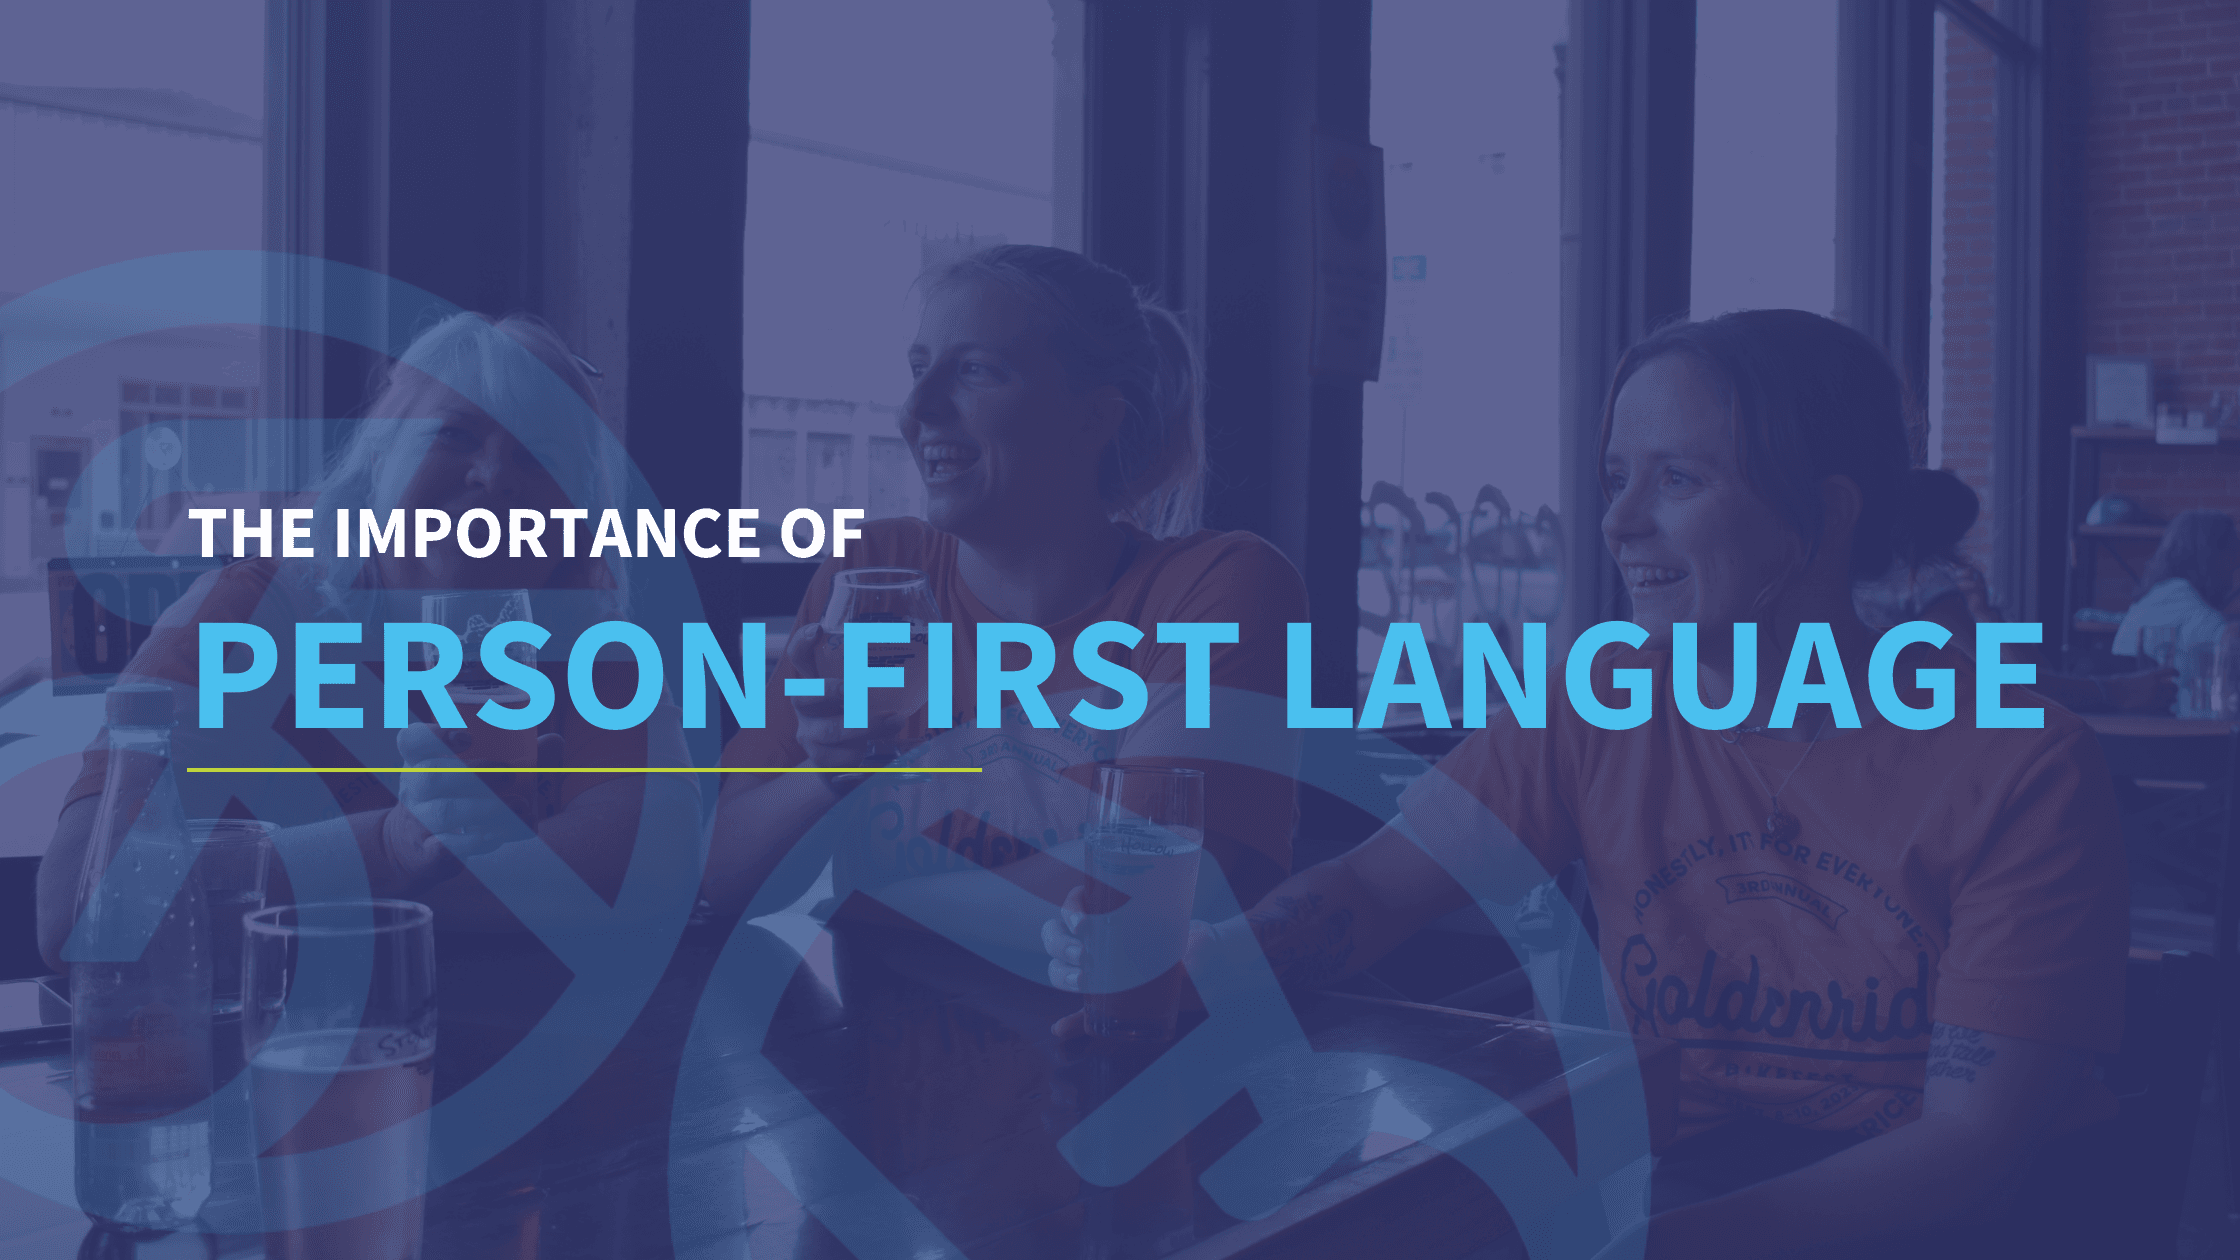 Language Matters: The Importance of First-Person Language